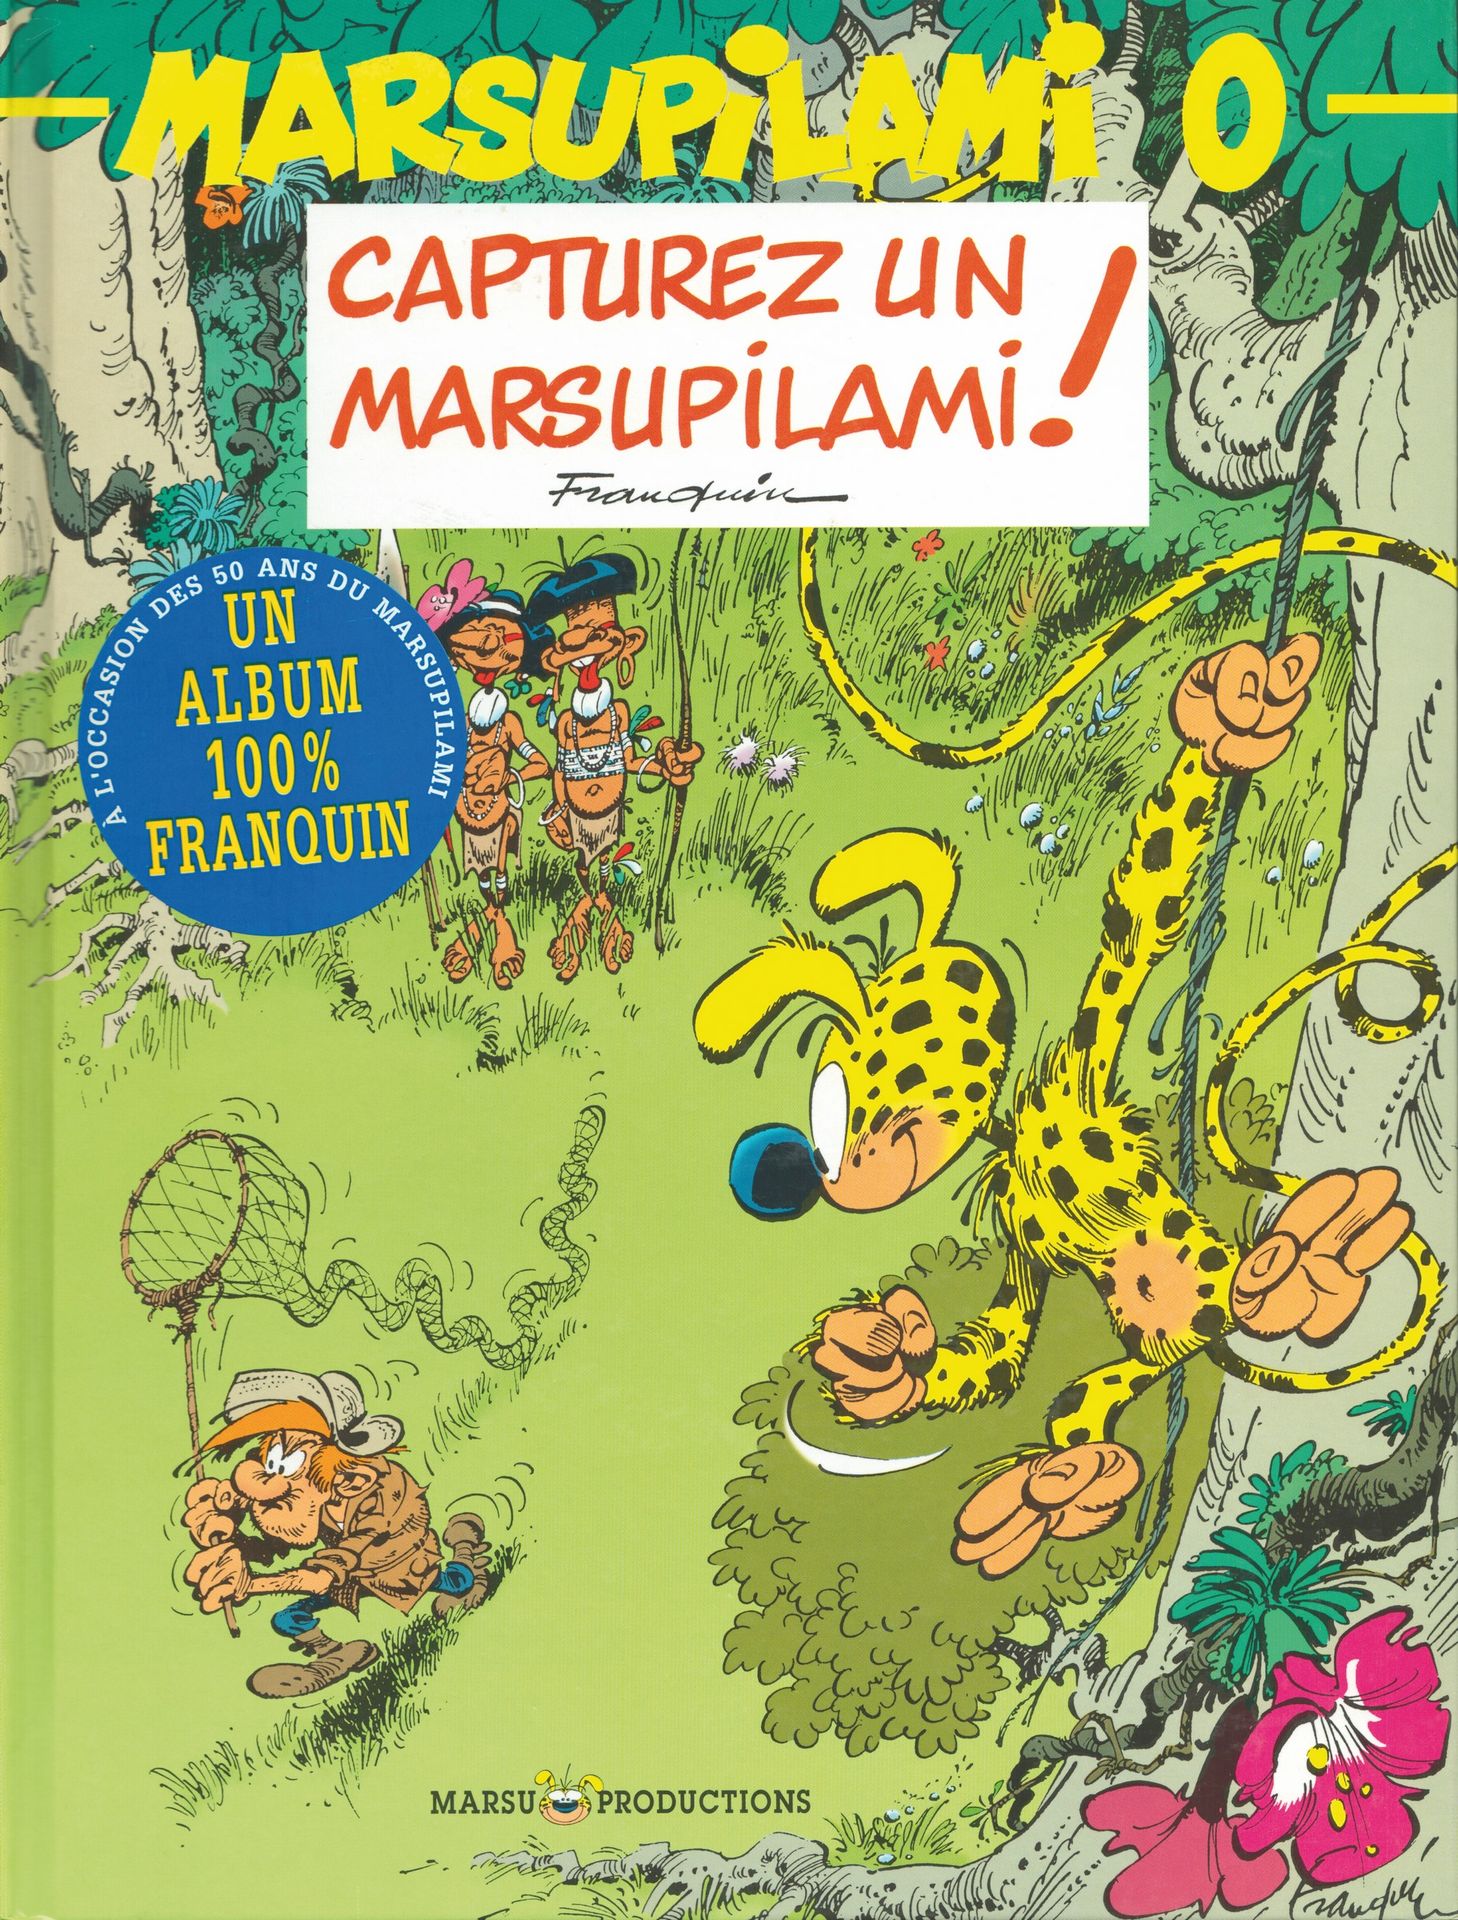 BATEM The marsupilami. Lot of volumes 0 to 32. All are in Eo. Very good conditio&hellip;